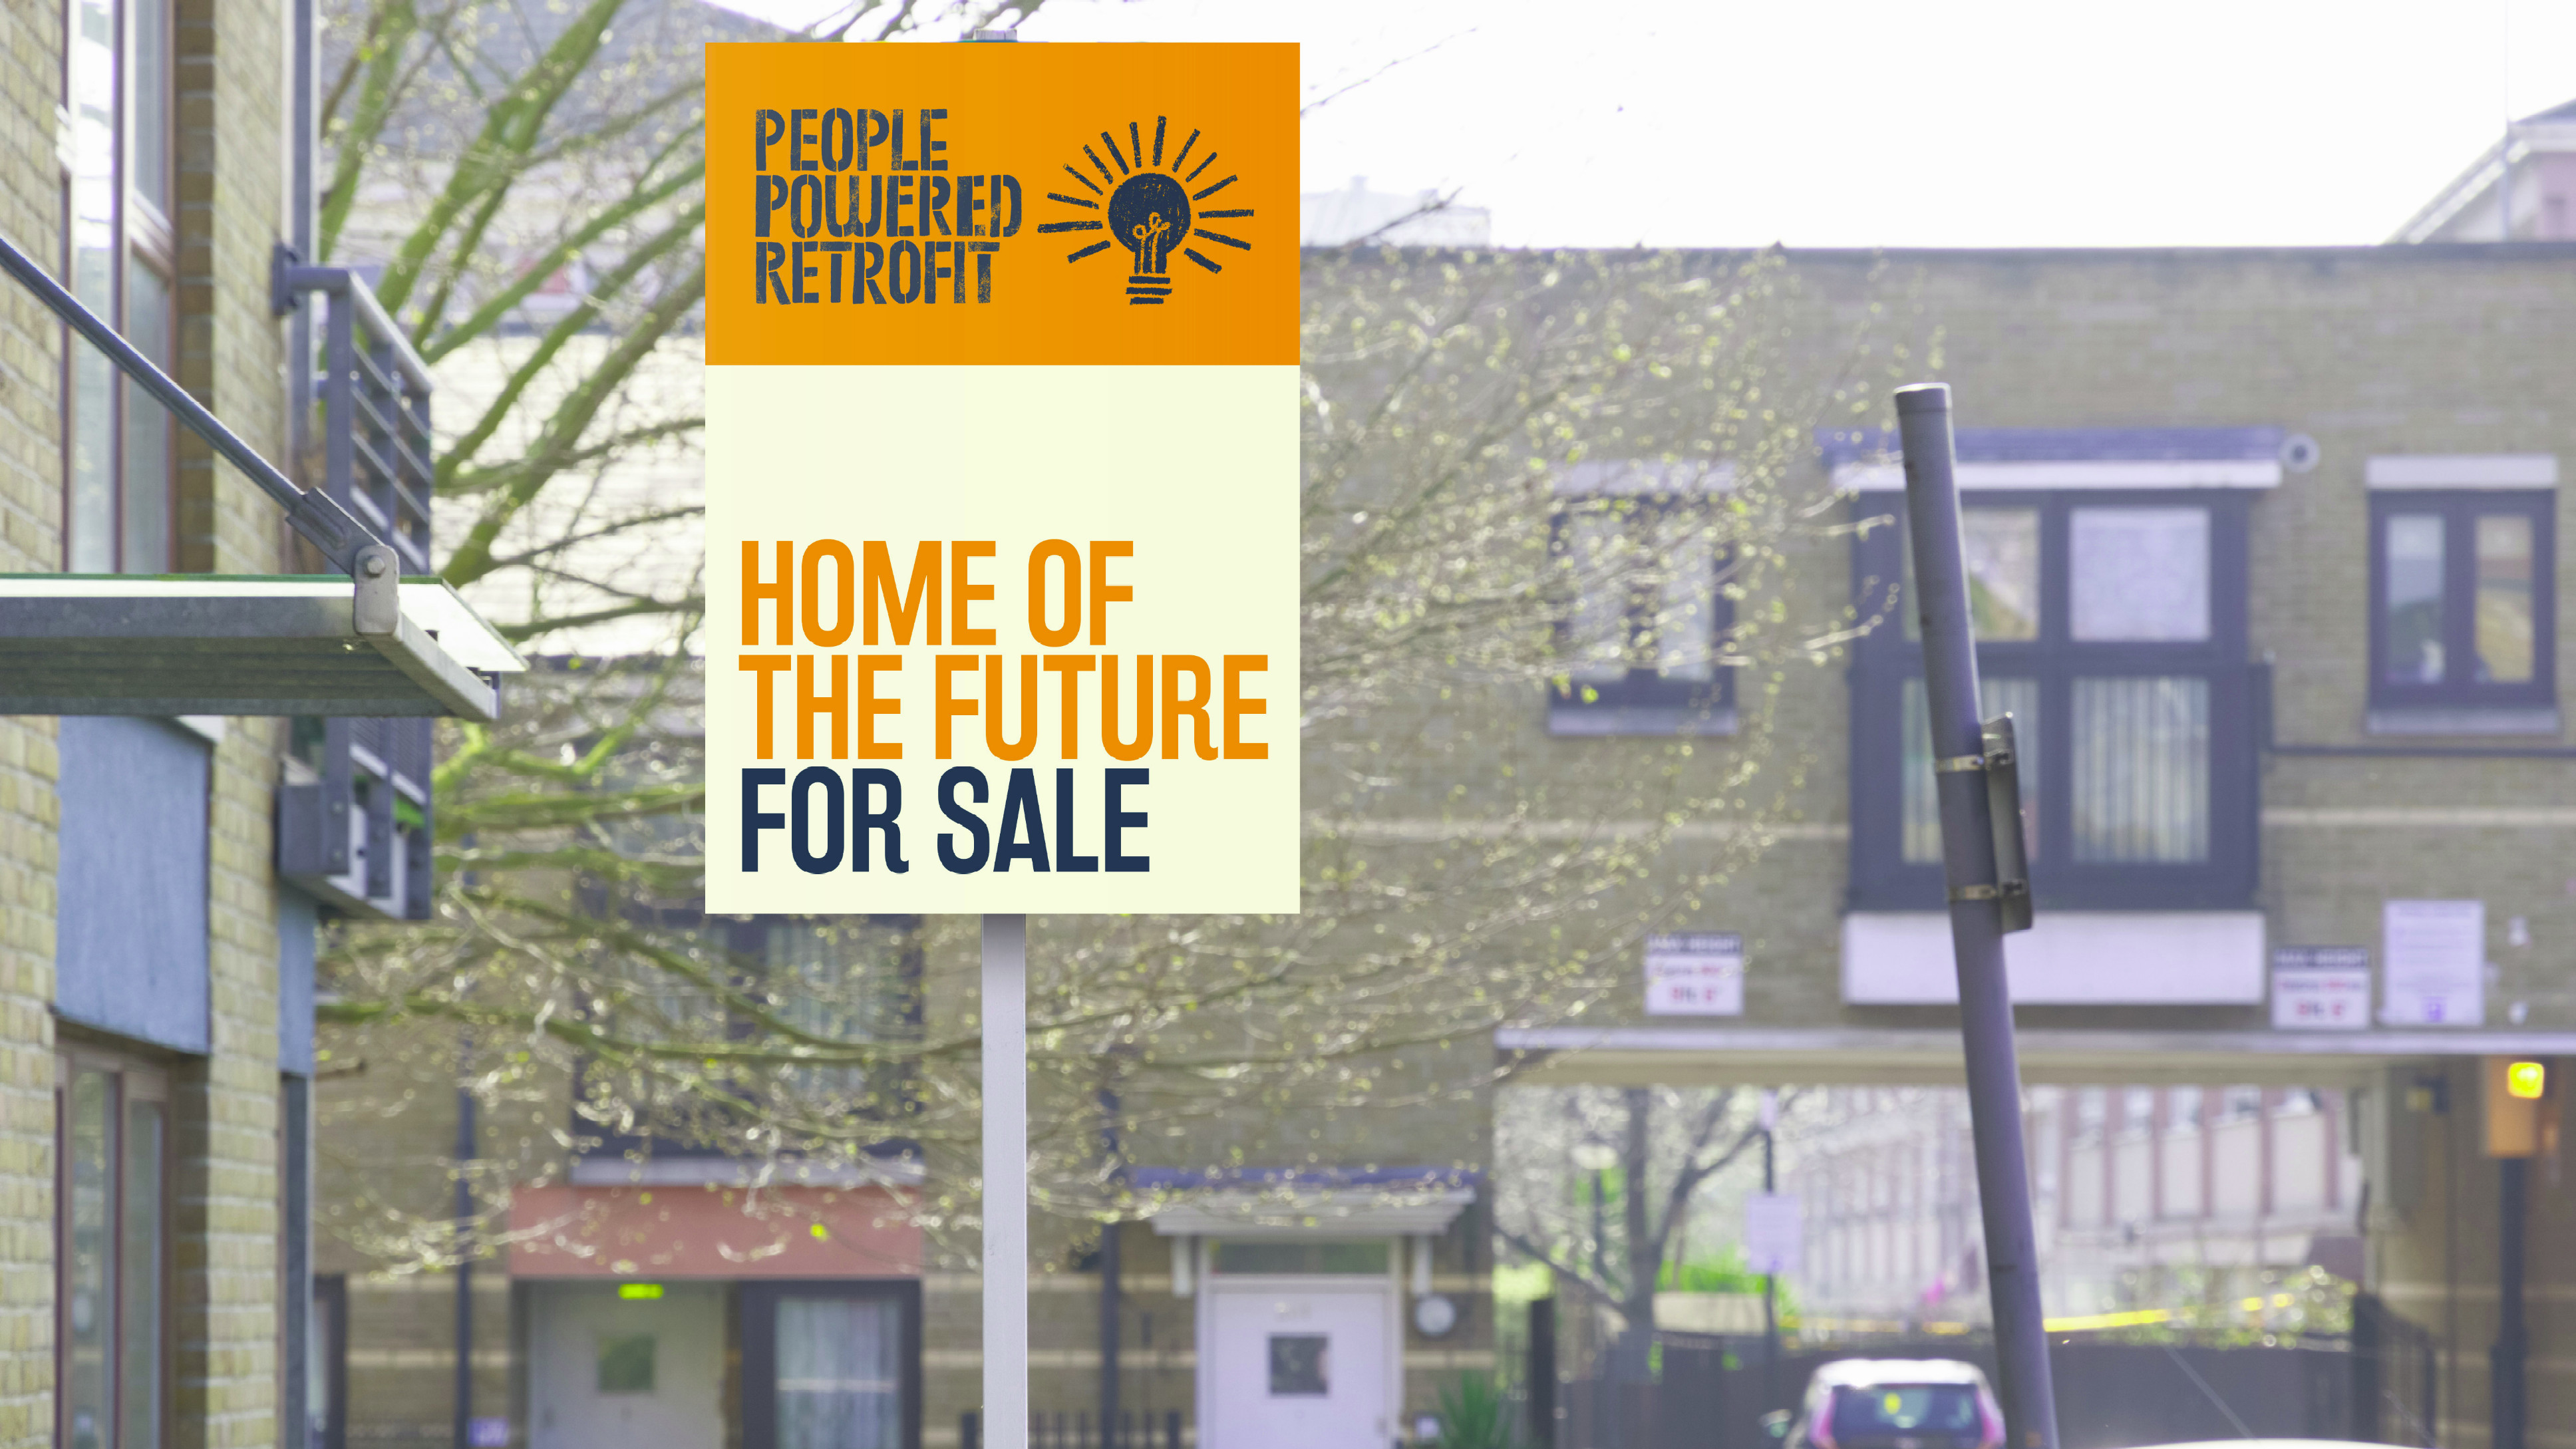 Photo of a sign saying “People Powered Retrofit - Home of the Future For Sale“